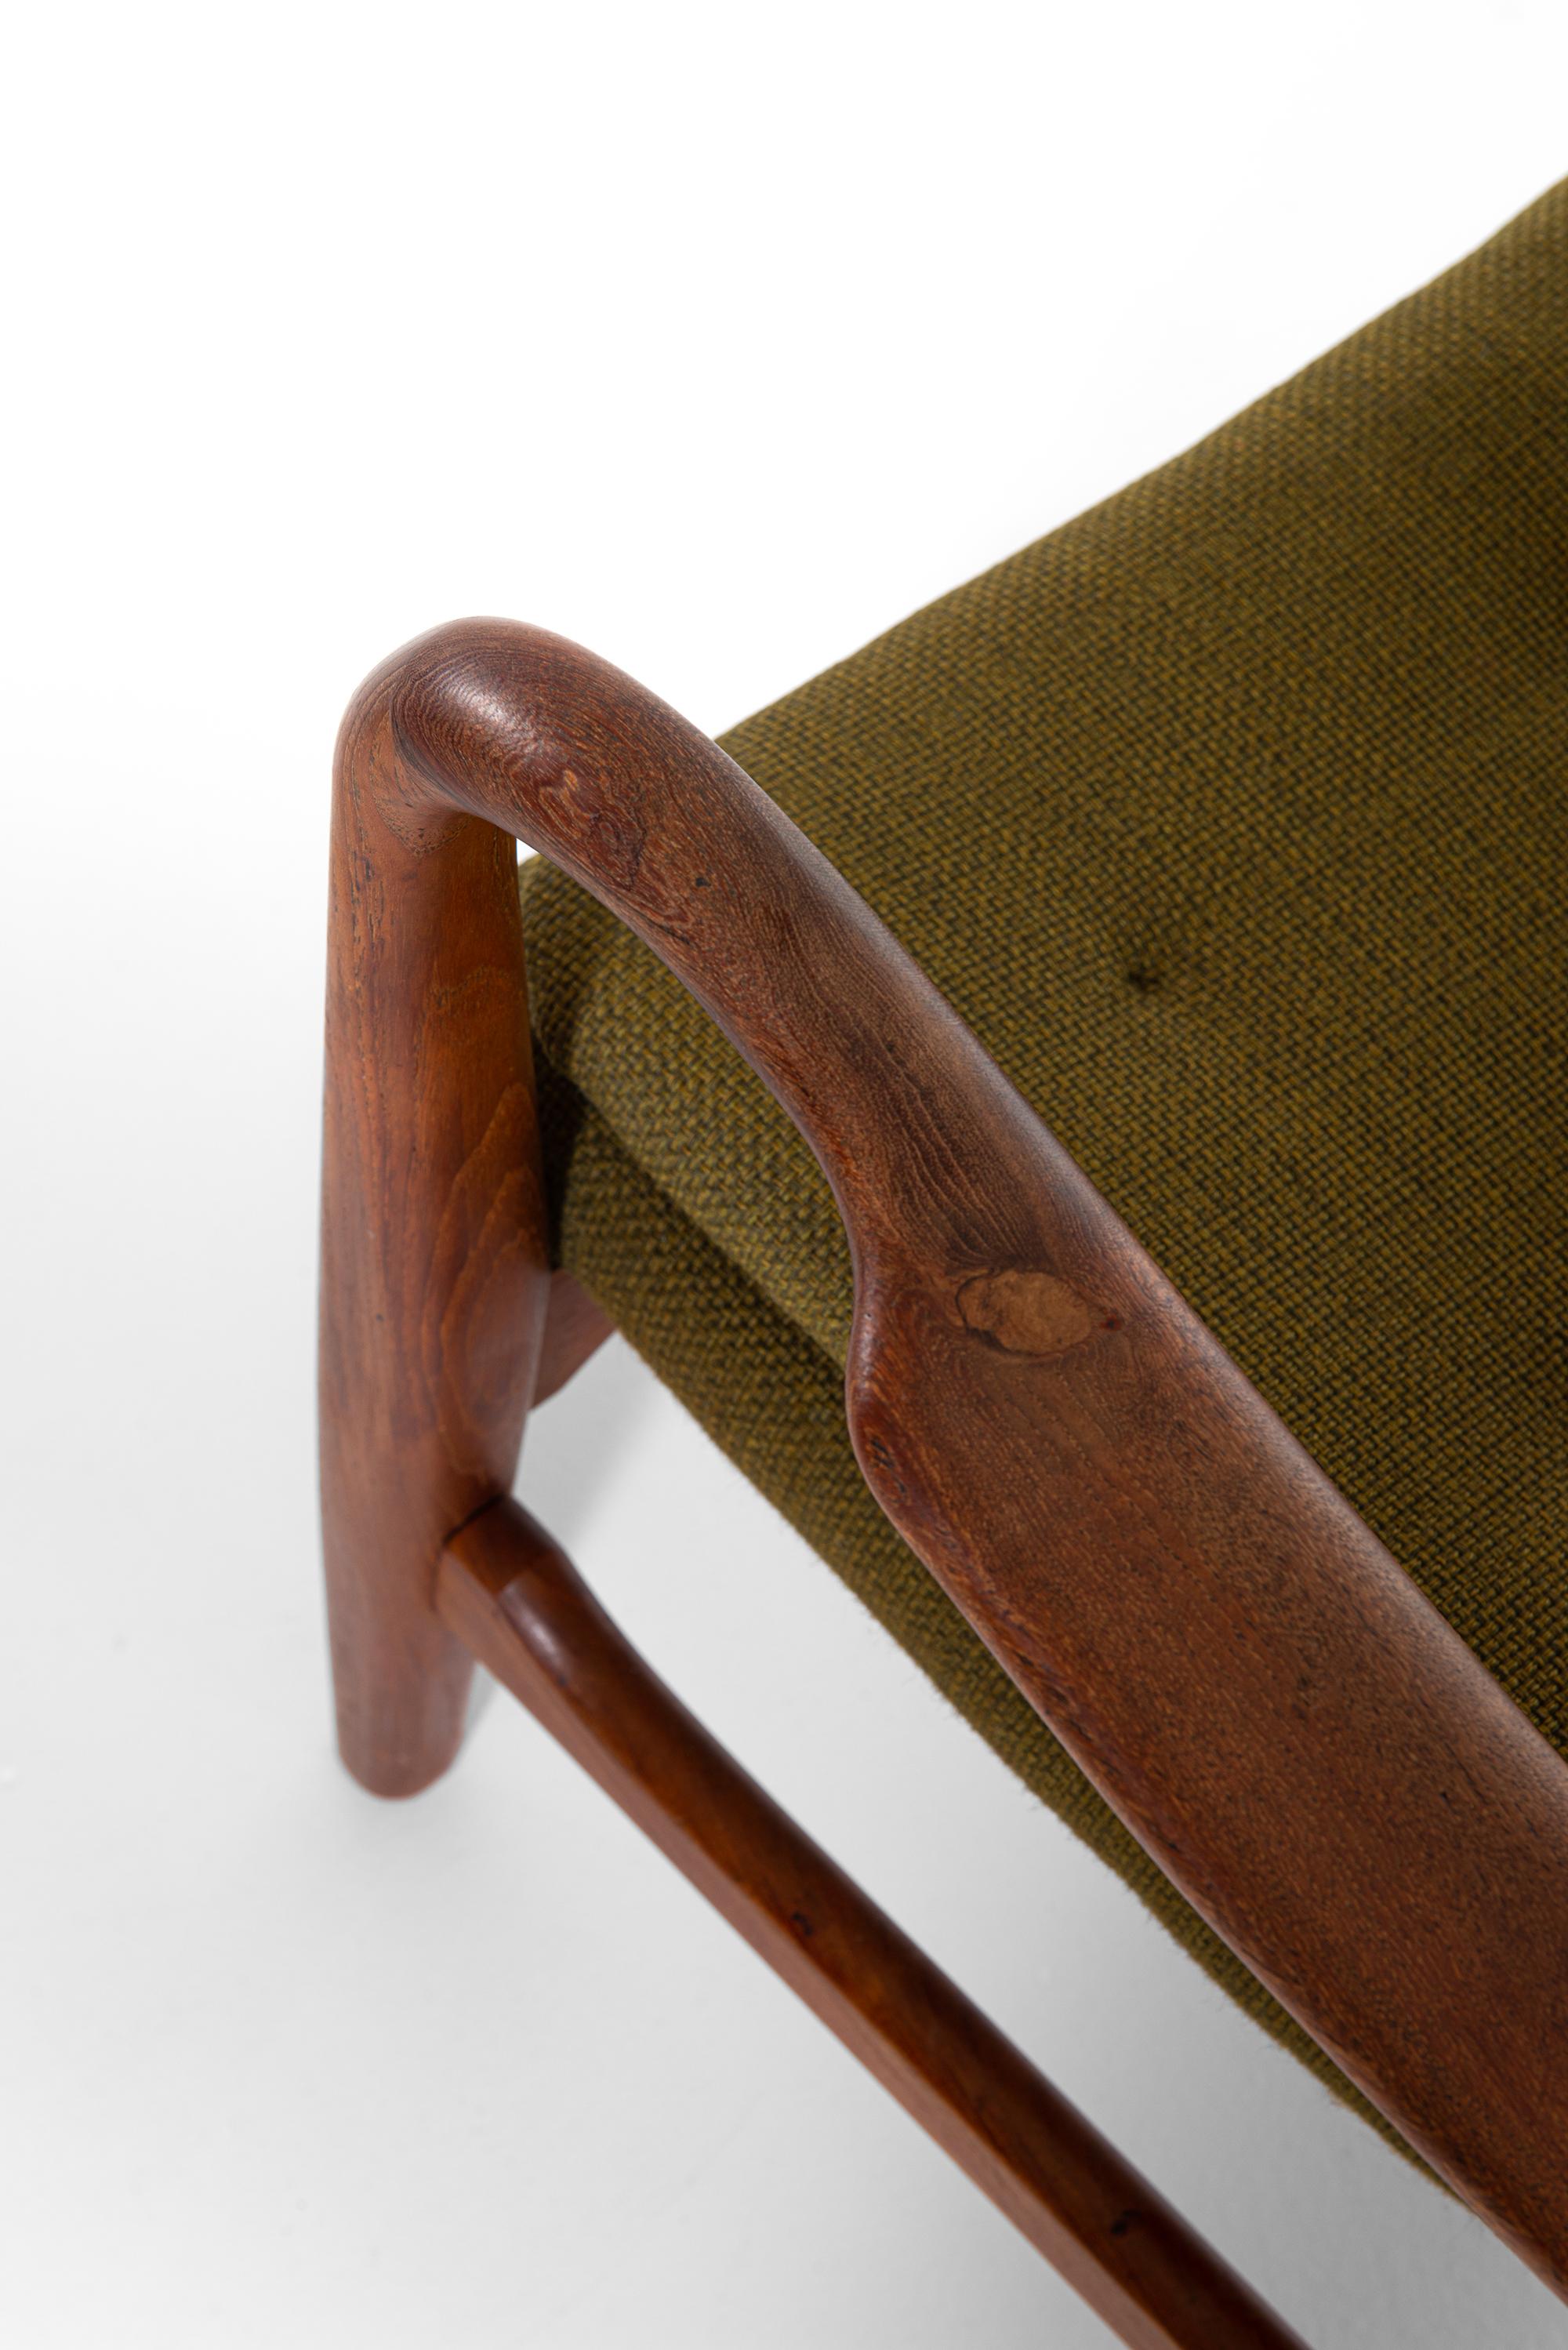 Ib Madsen & Acton Schubell Easy Chairs Produced by Madsen & Schubell in Denmark 1